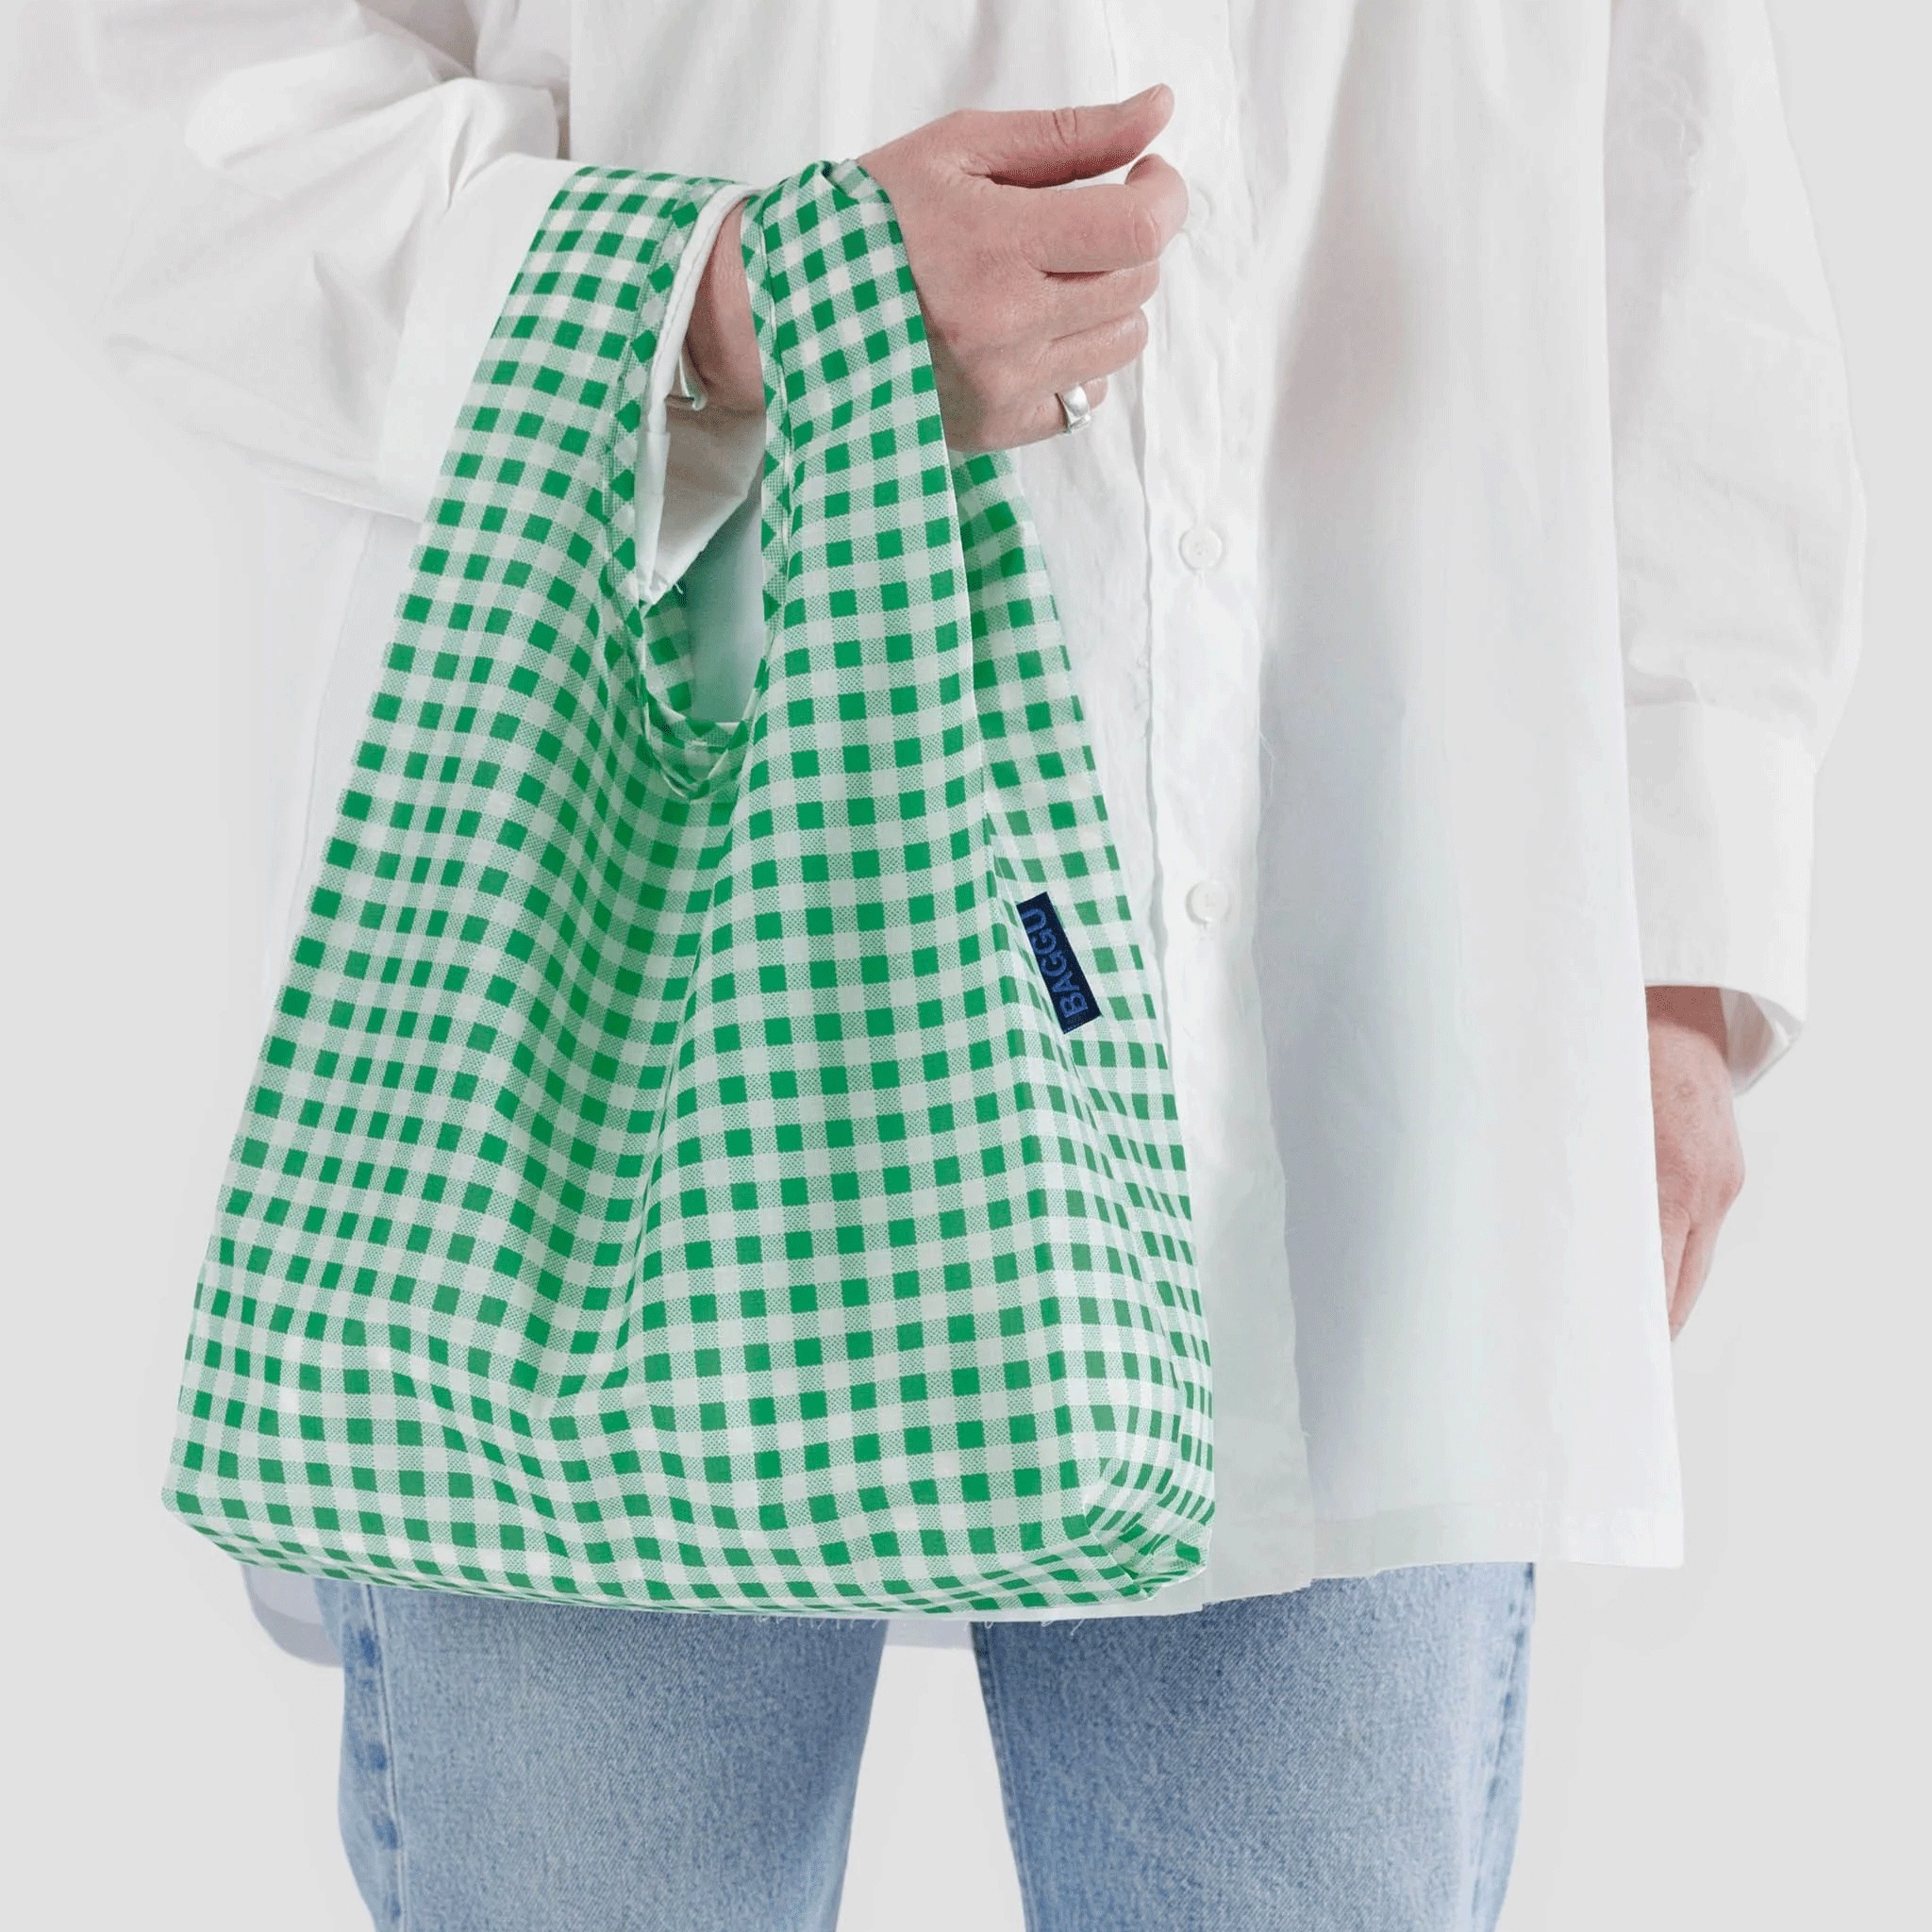 A model holding a green and white gingham printed nylon tote bag.